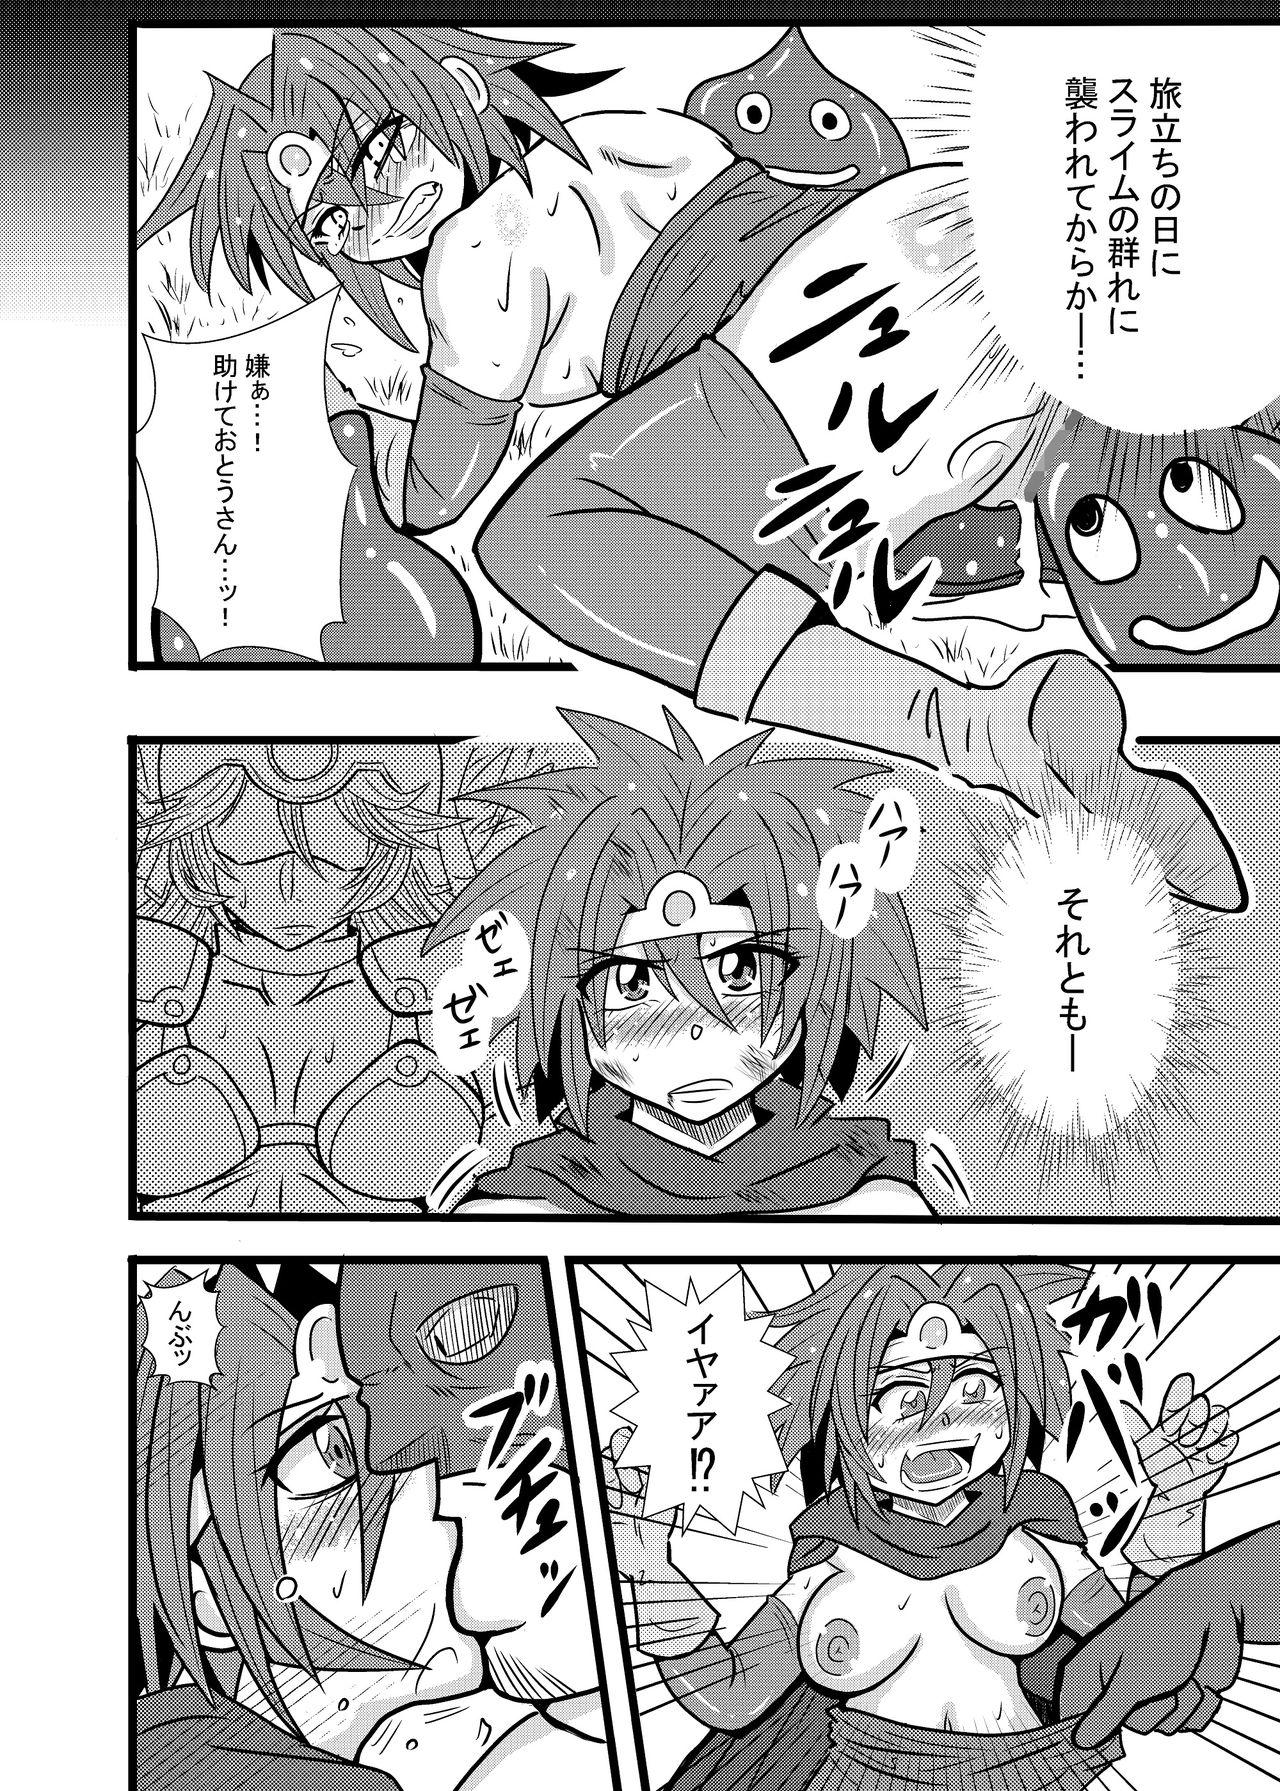 Gay 3some Yuusha Smile!? - Dragon quest iii Public - Page 5